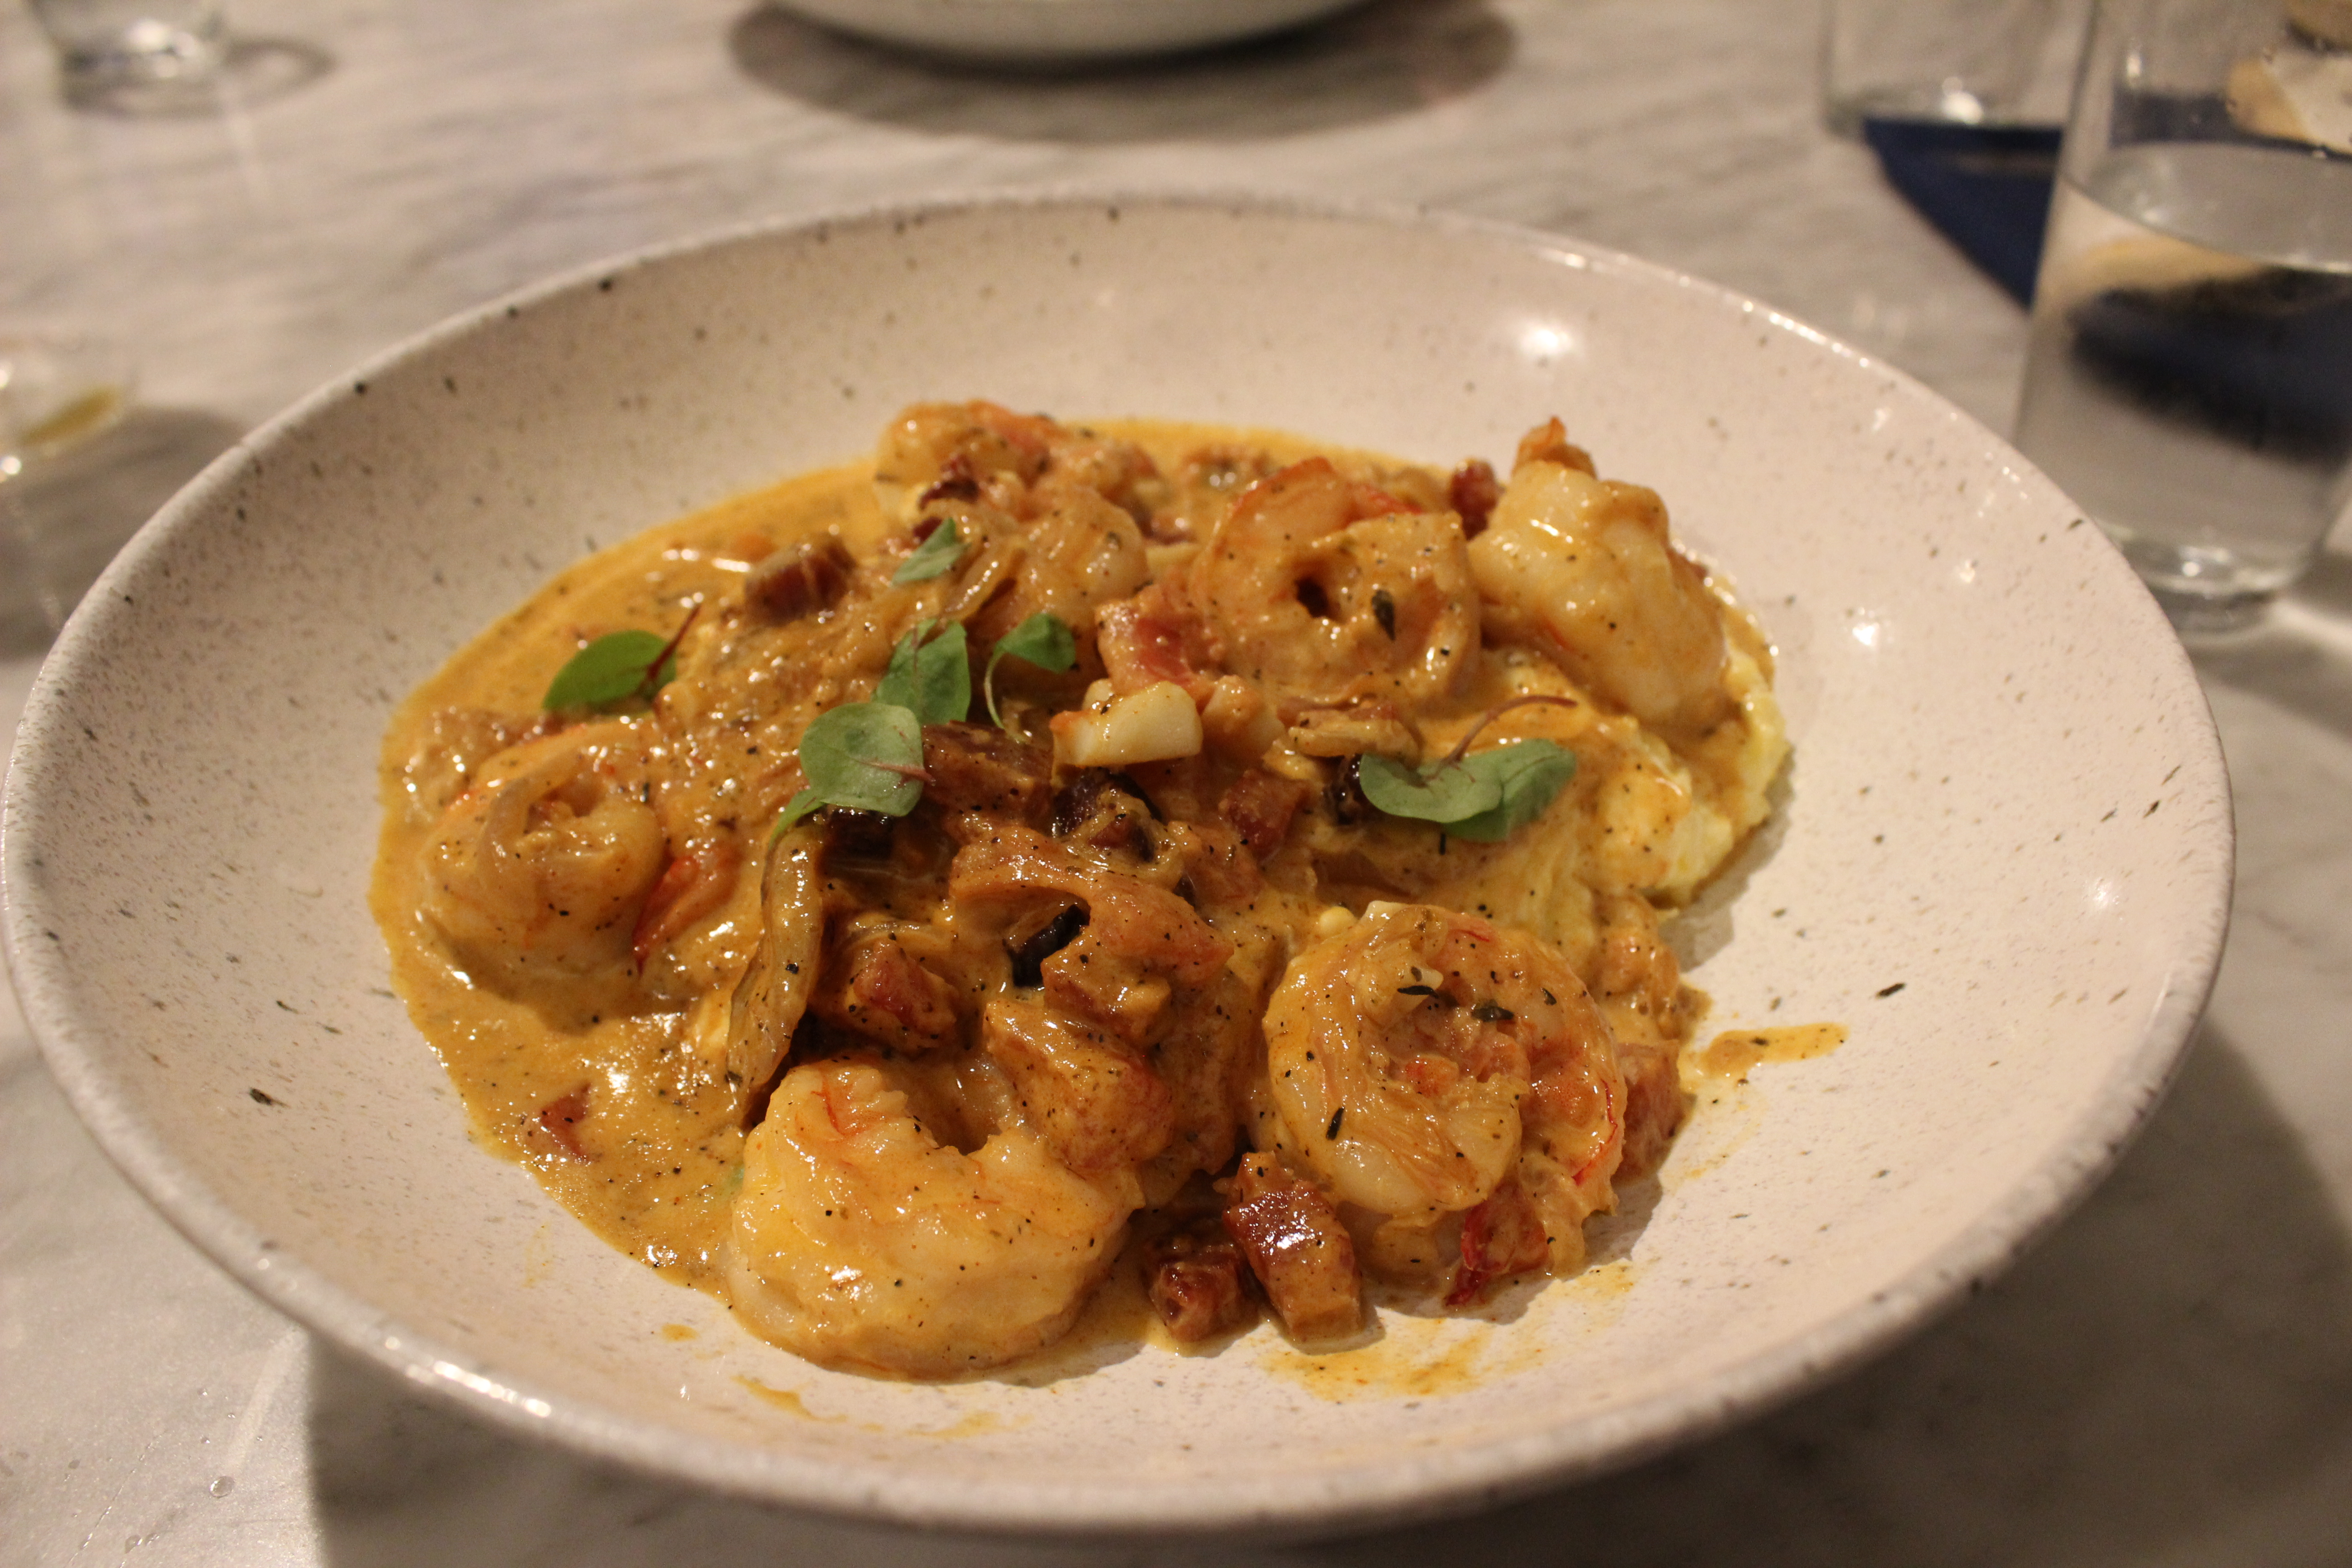 Life-changing shrimp and grits. 